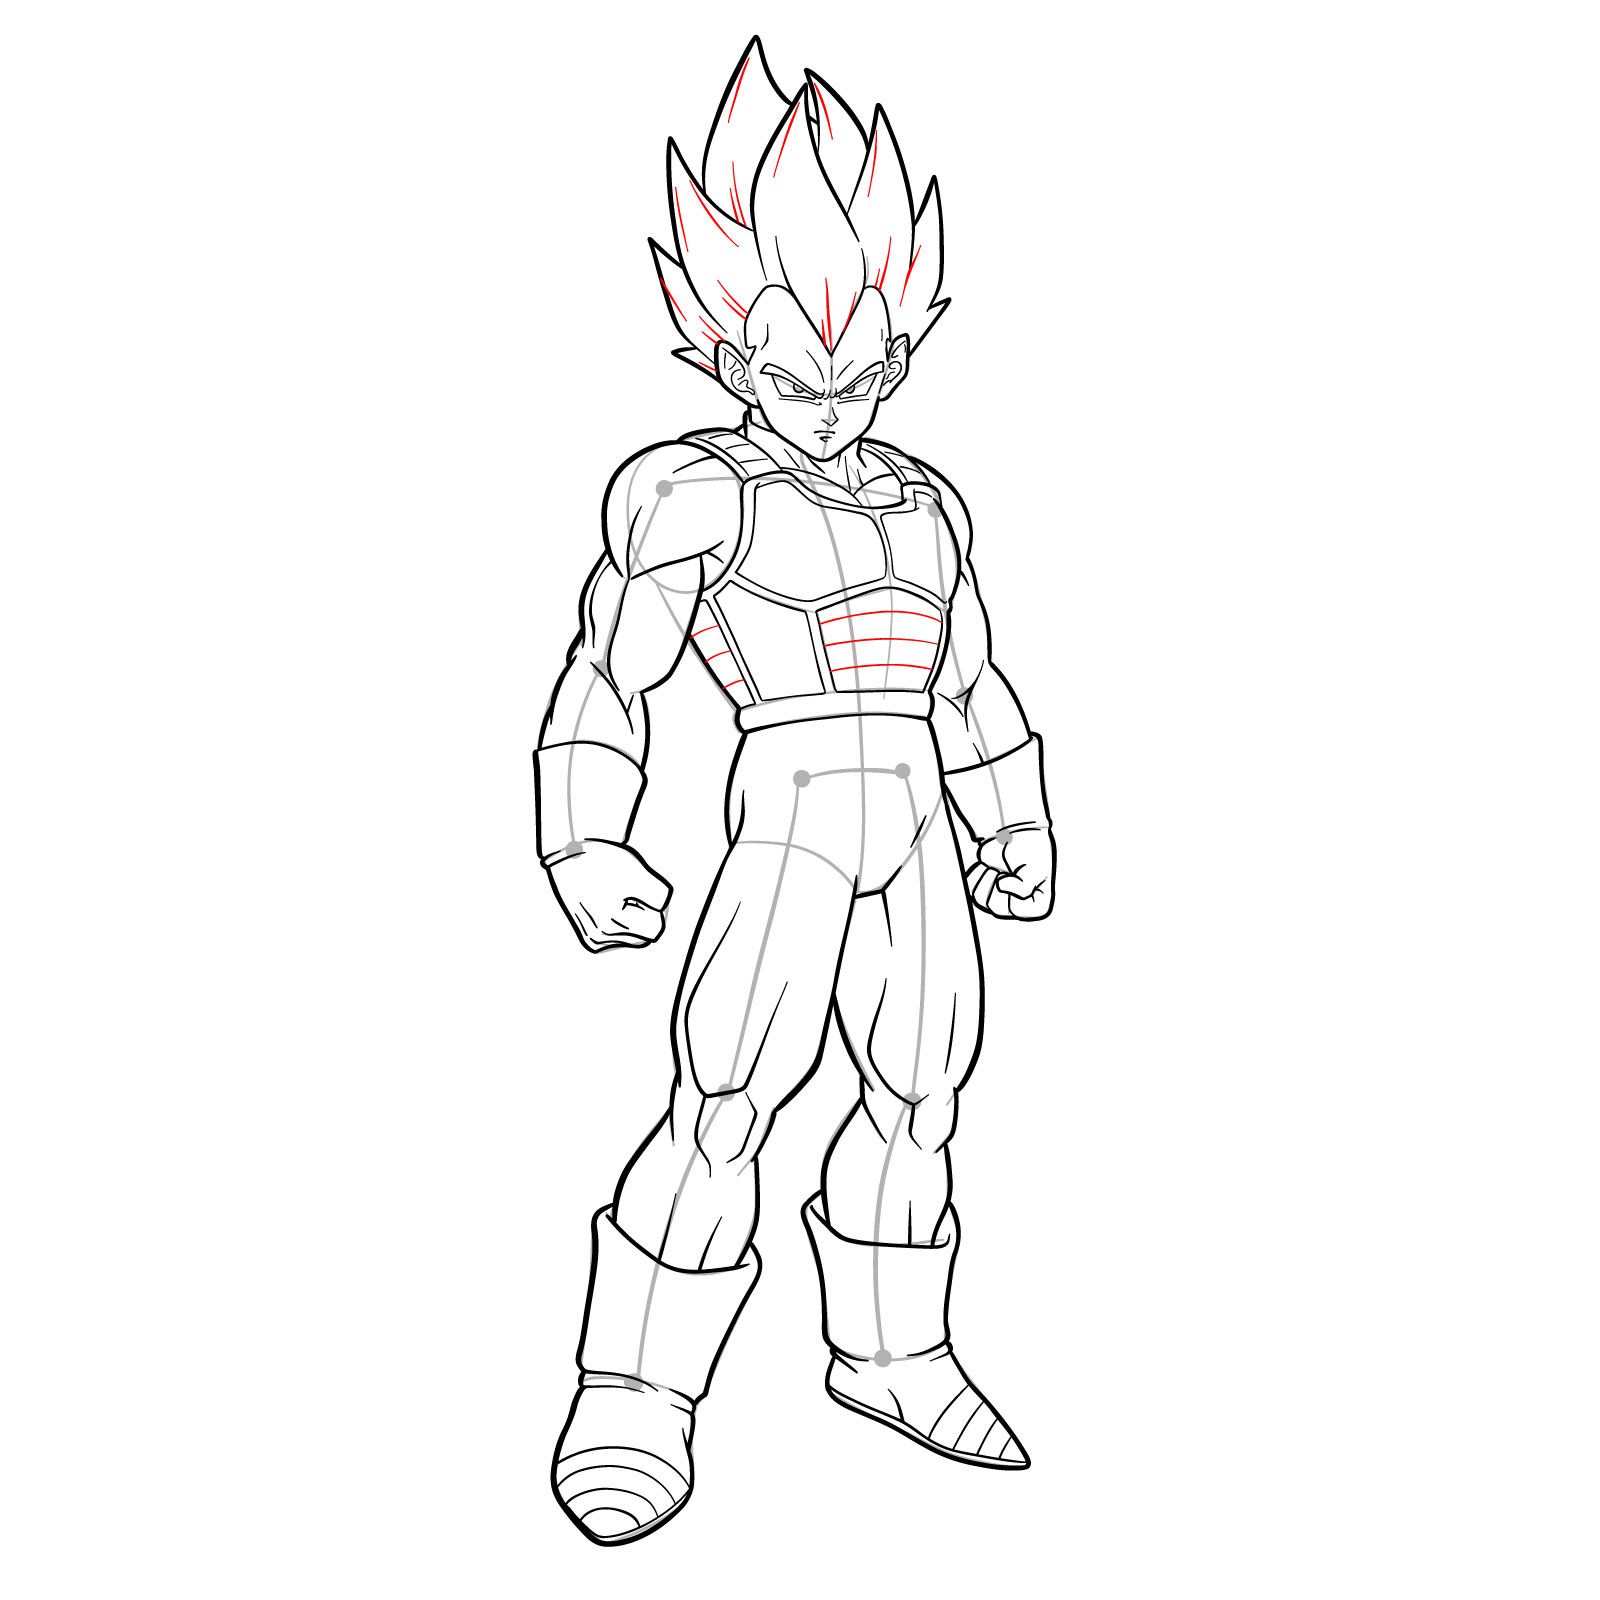 How to draw Vegeta in SSGSS - step 42